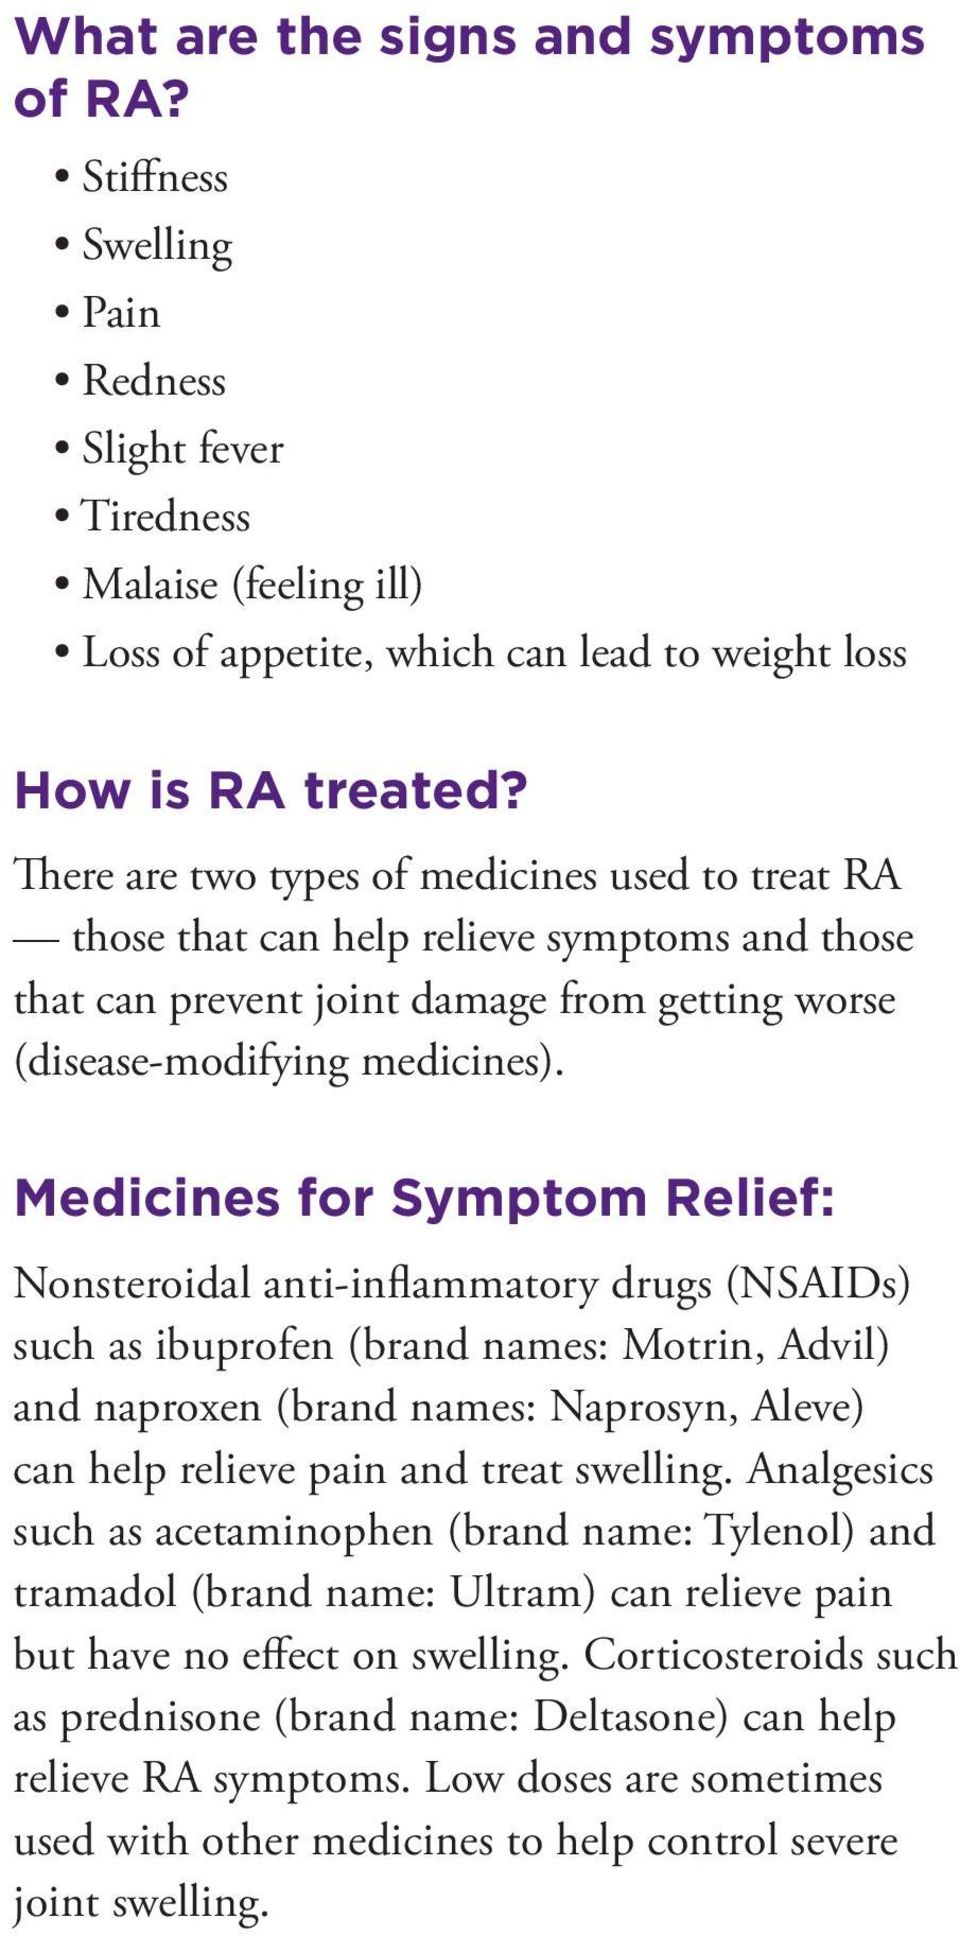 Medicines for Symptom Relief: Nonsteroidal anti-inflammatory drugs (NSAIDs) such as ibuprofen (brand names: Motrin, Advil) and naproxen (brand names: Naprosyn, Aleve) can help relieve pain and treat